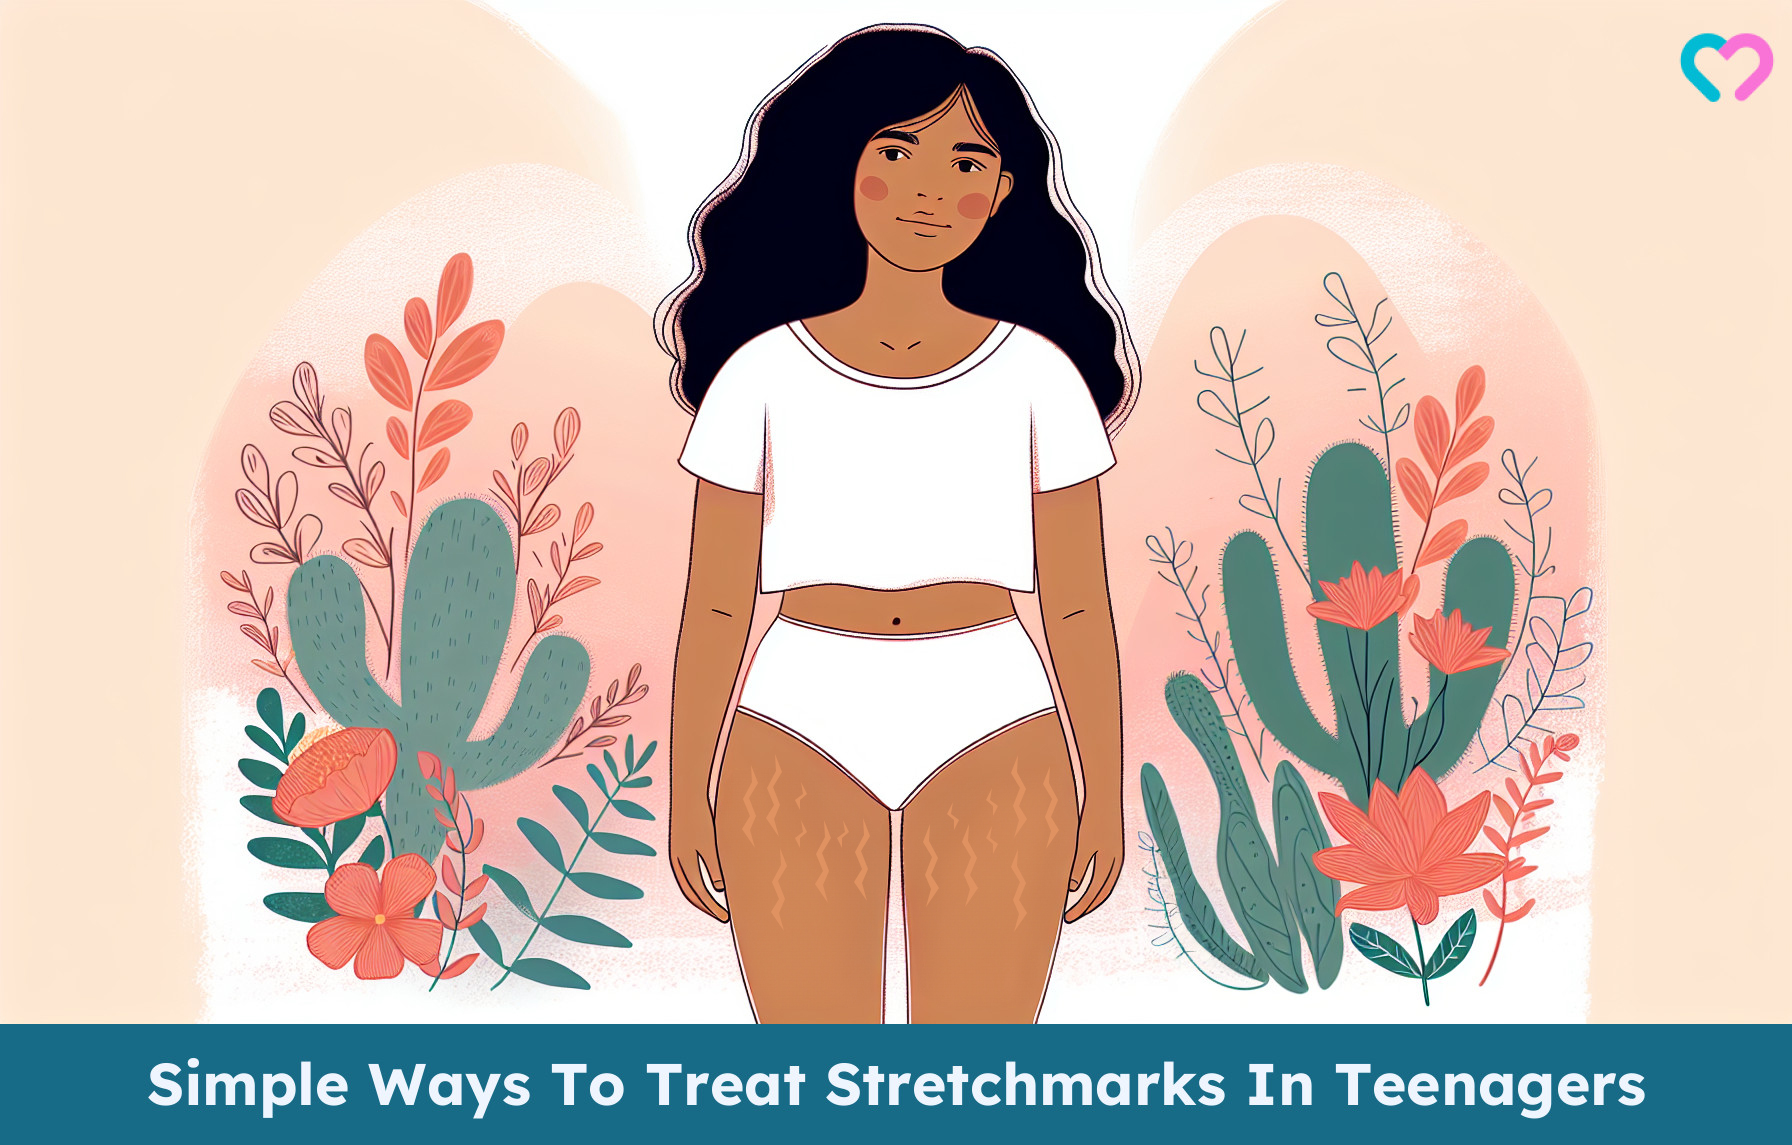 Stretch Marks In Teenagers_illustration